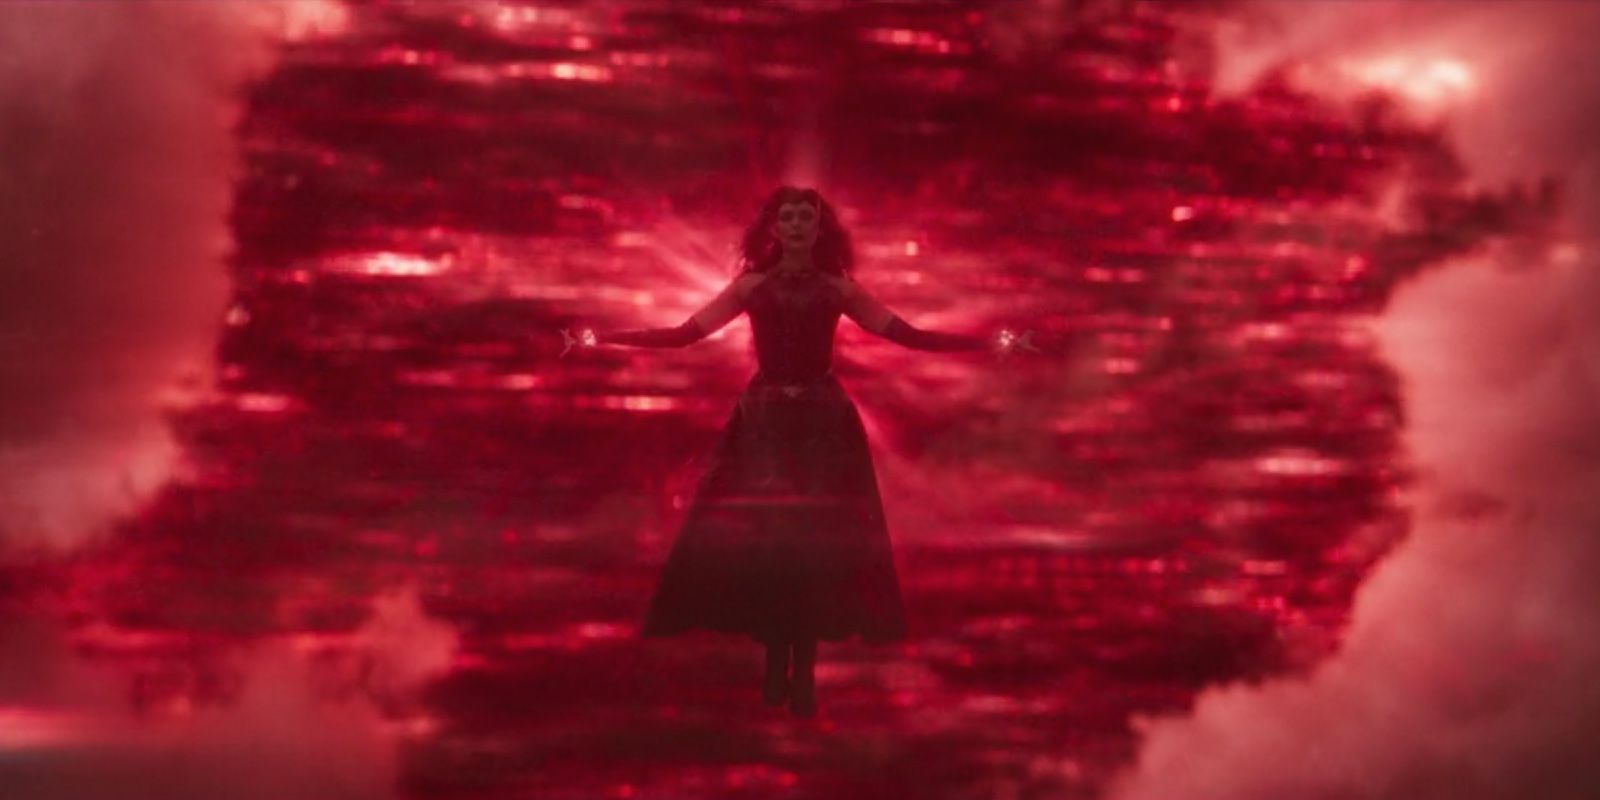 Wanda Fights Agatha Becomes Scarlet Witch in WandaVision